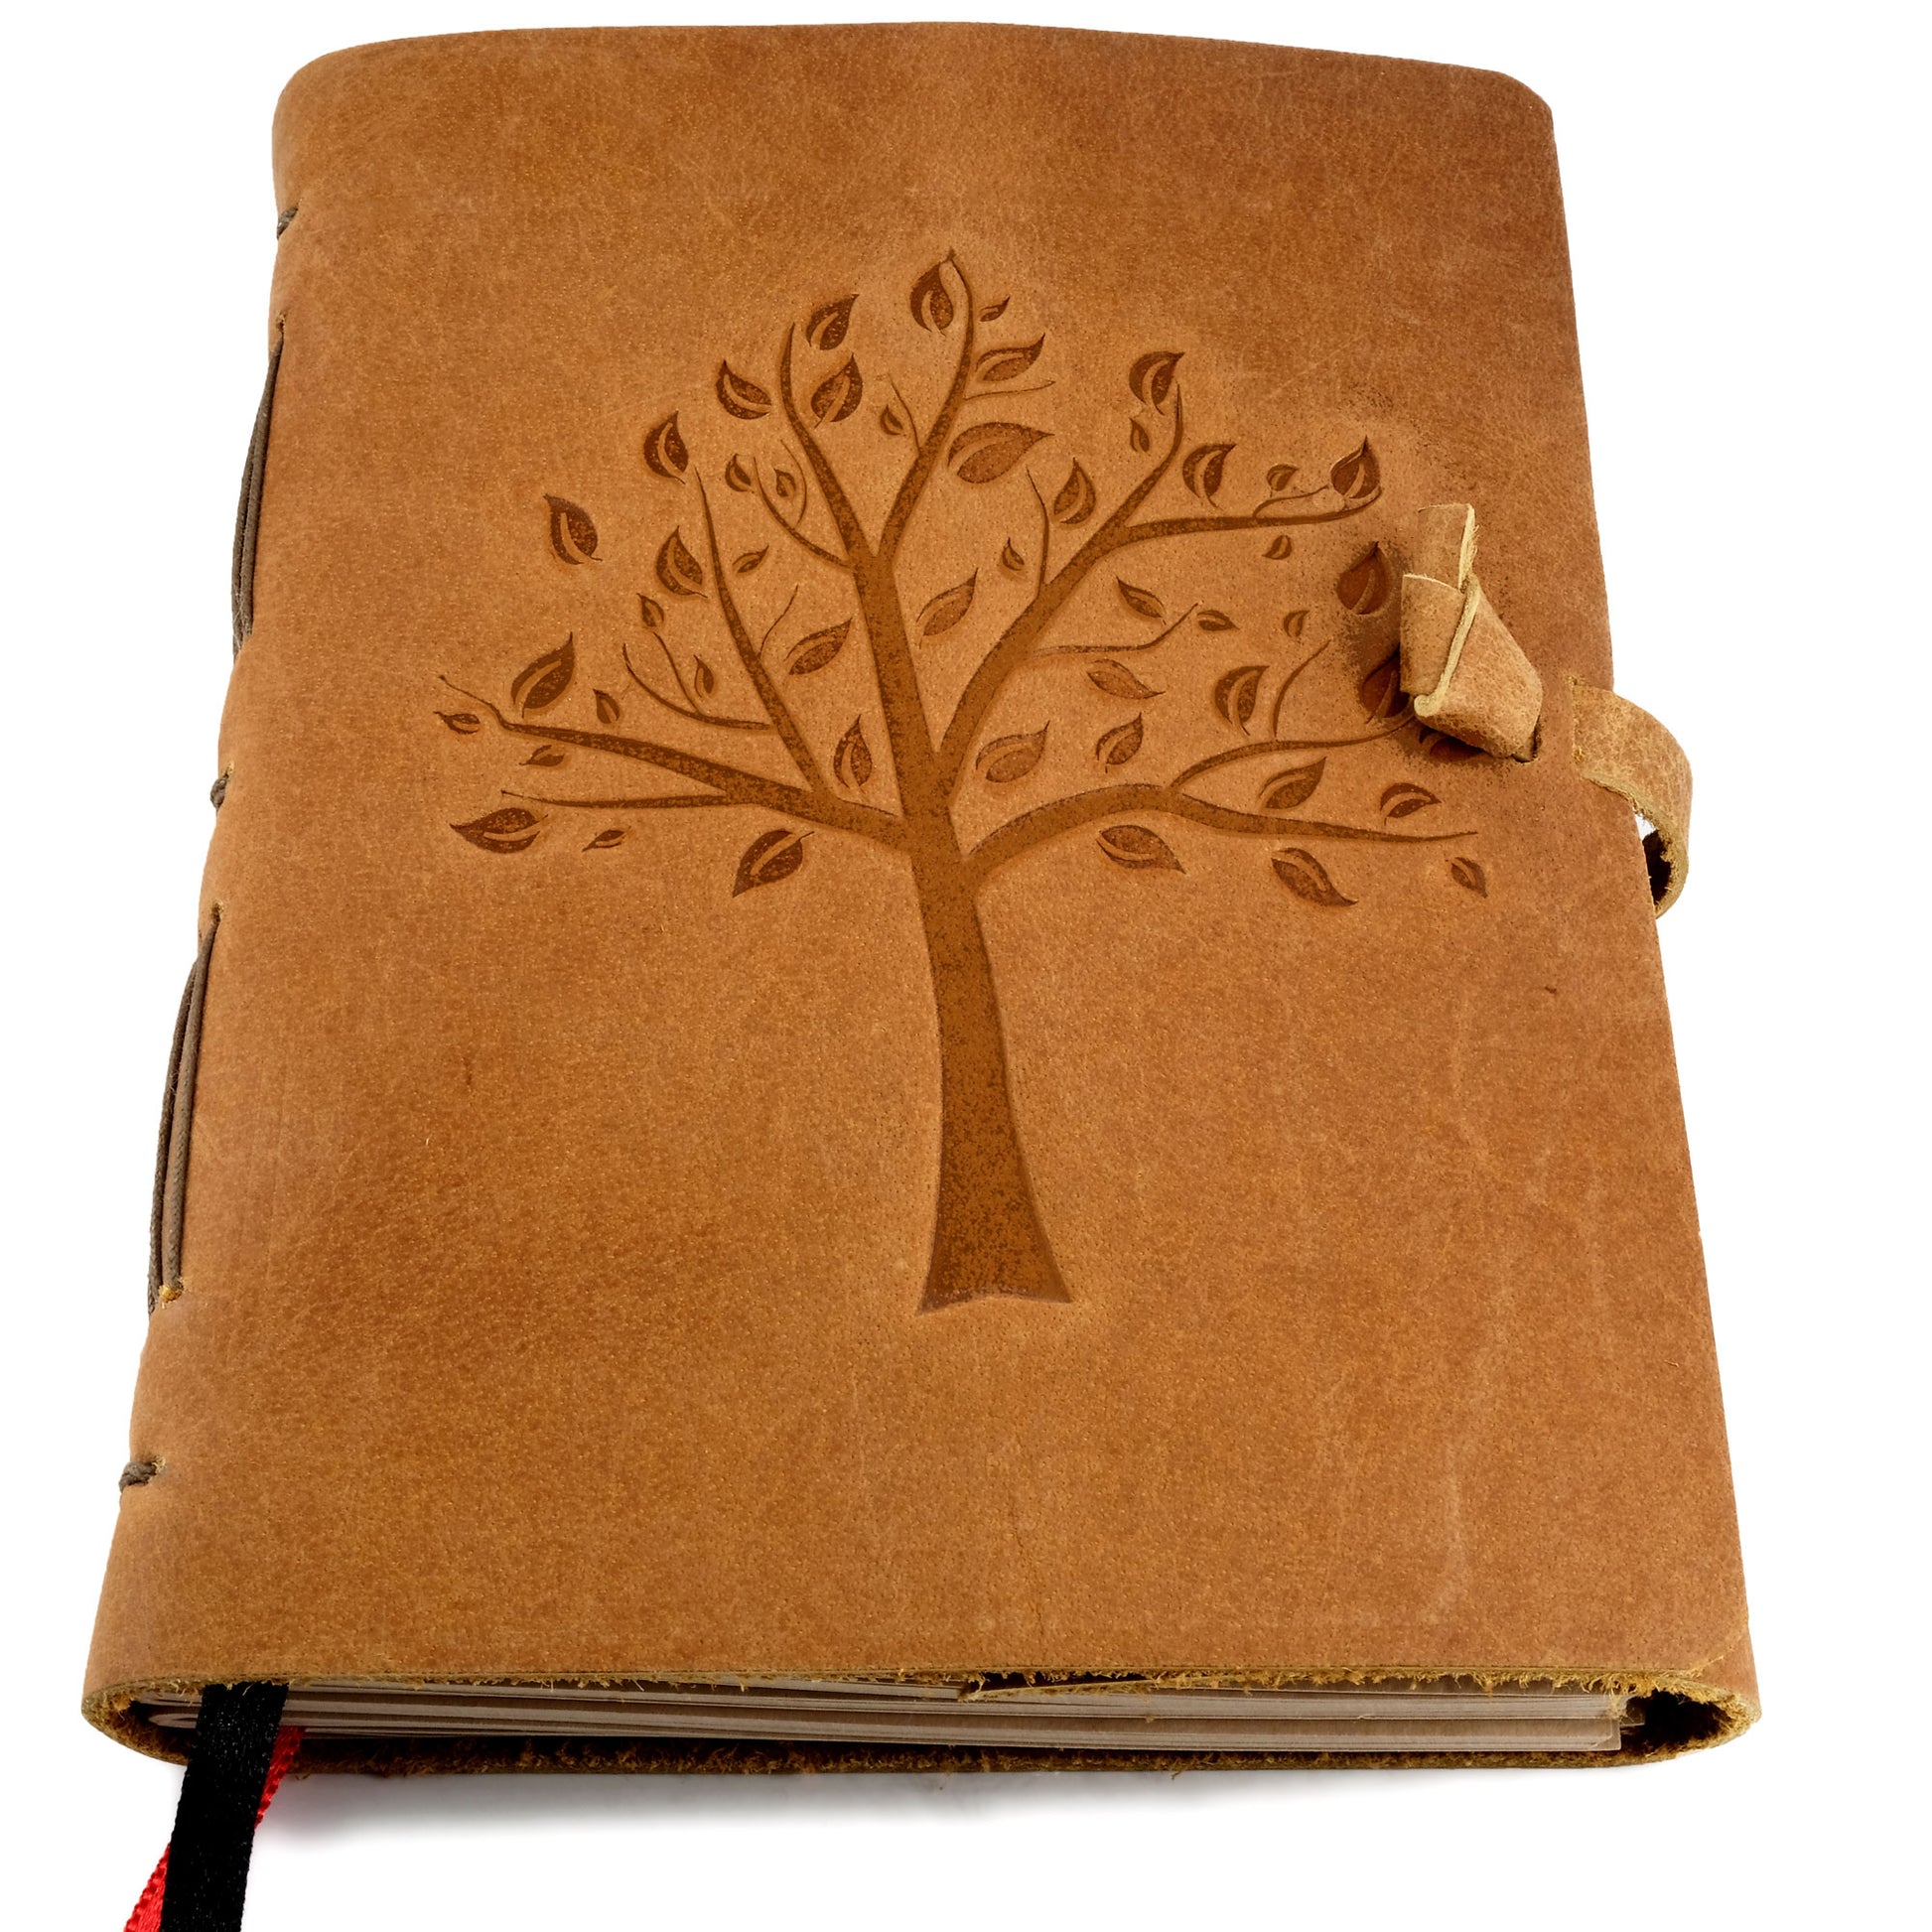 Leather Journal Refillable Lined Paper Tree of Life Handmade